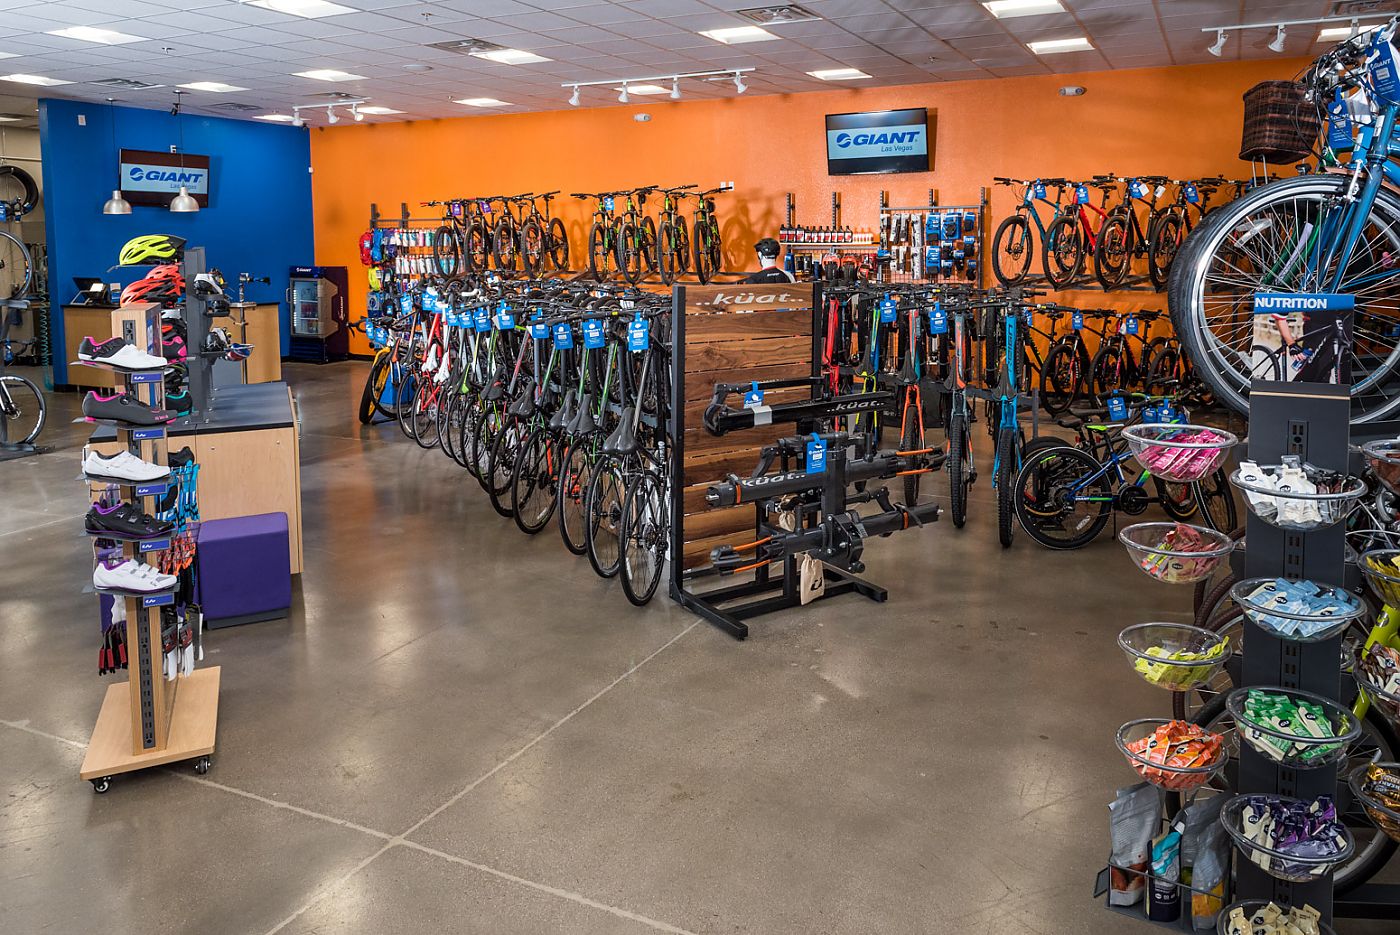 Raap bladeren op bruid Kaal Partners from diverse backgrounds open new Giant Las Vegas store | Bicycle  Retailer and Industry News